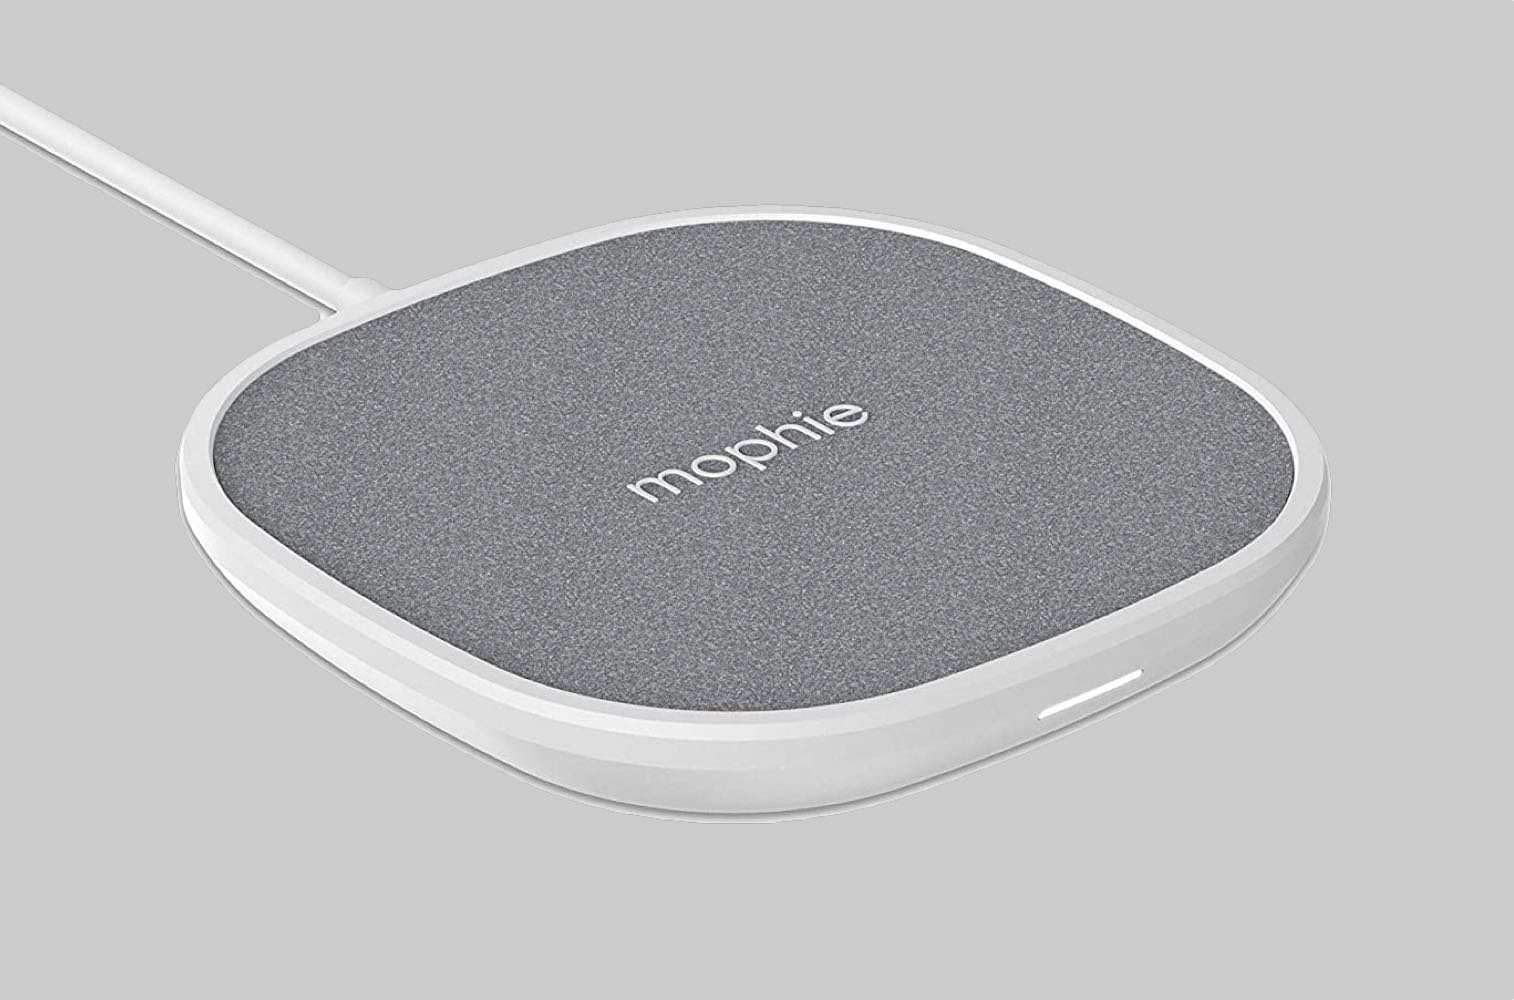 Mophie Wireless 10W Charging Pad